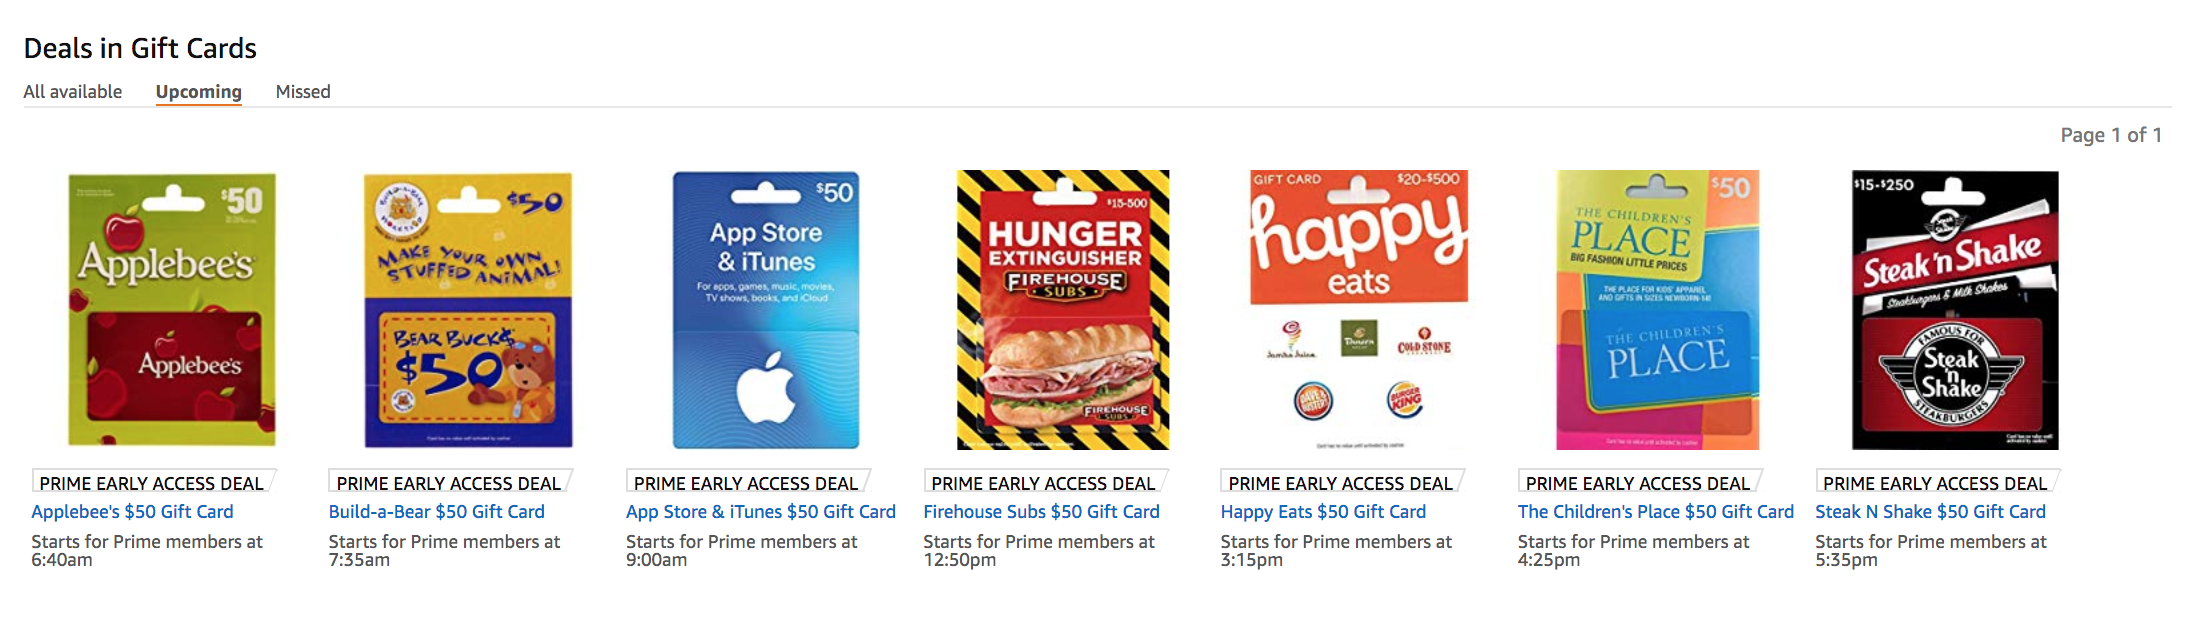 Cyber Monday Deal: 20% off Many Third-Party Gift Cards at Amazon - Deals We Like